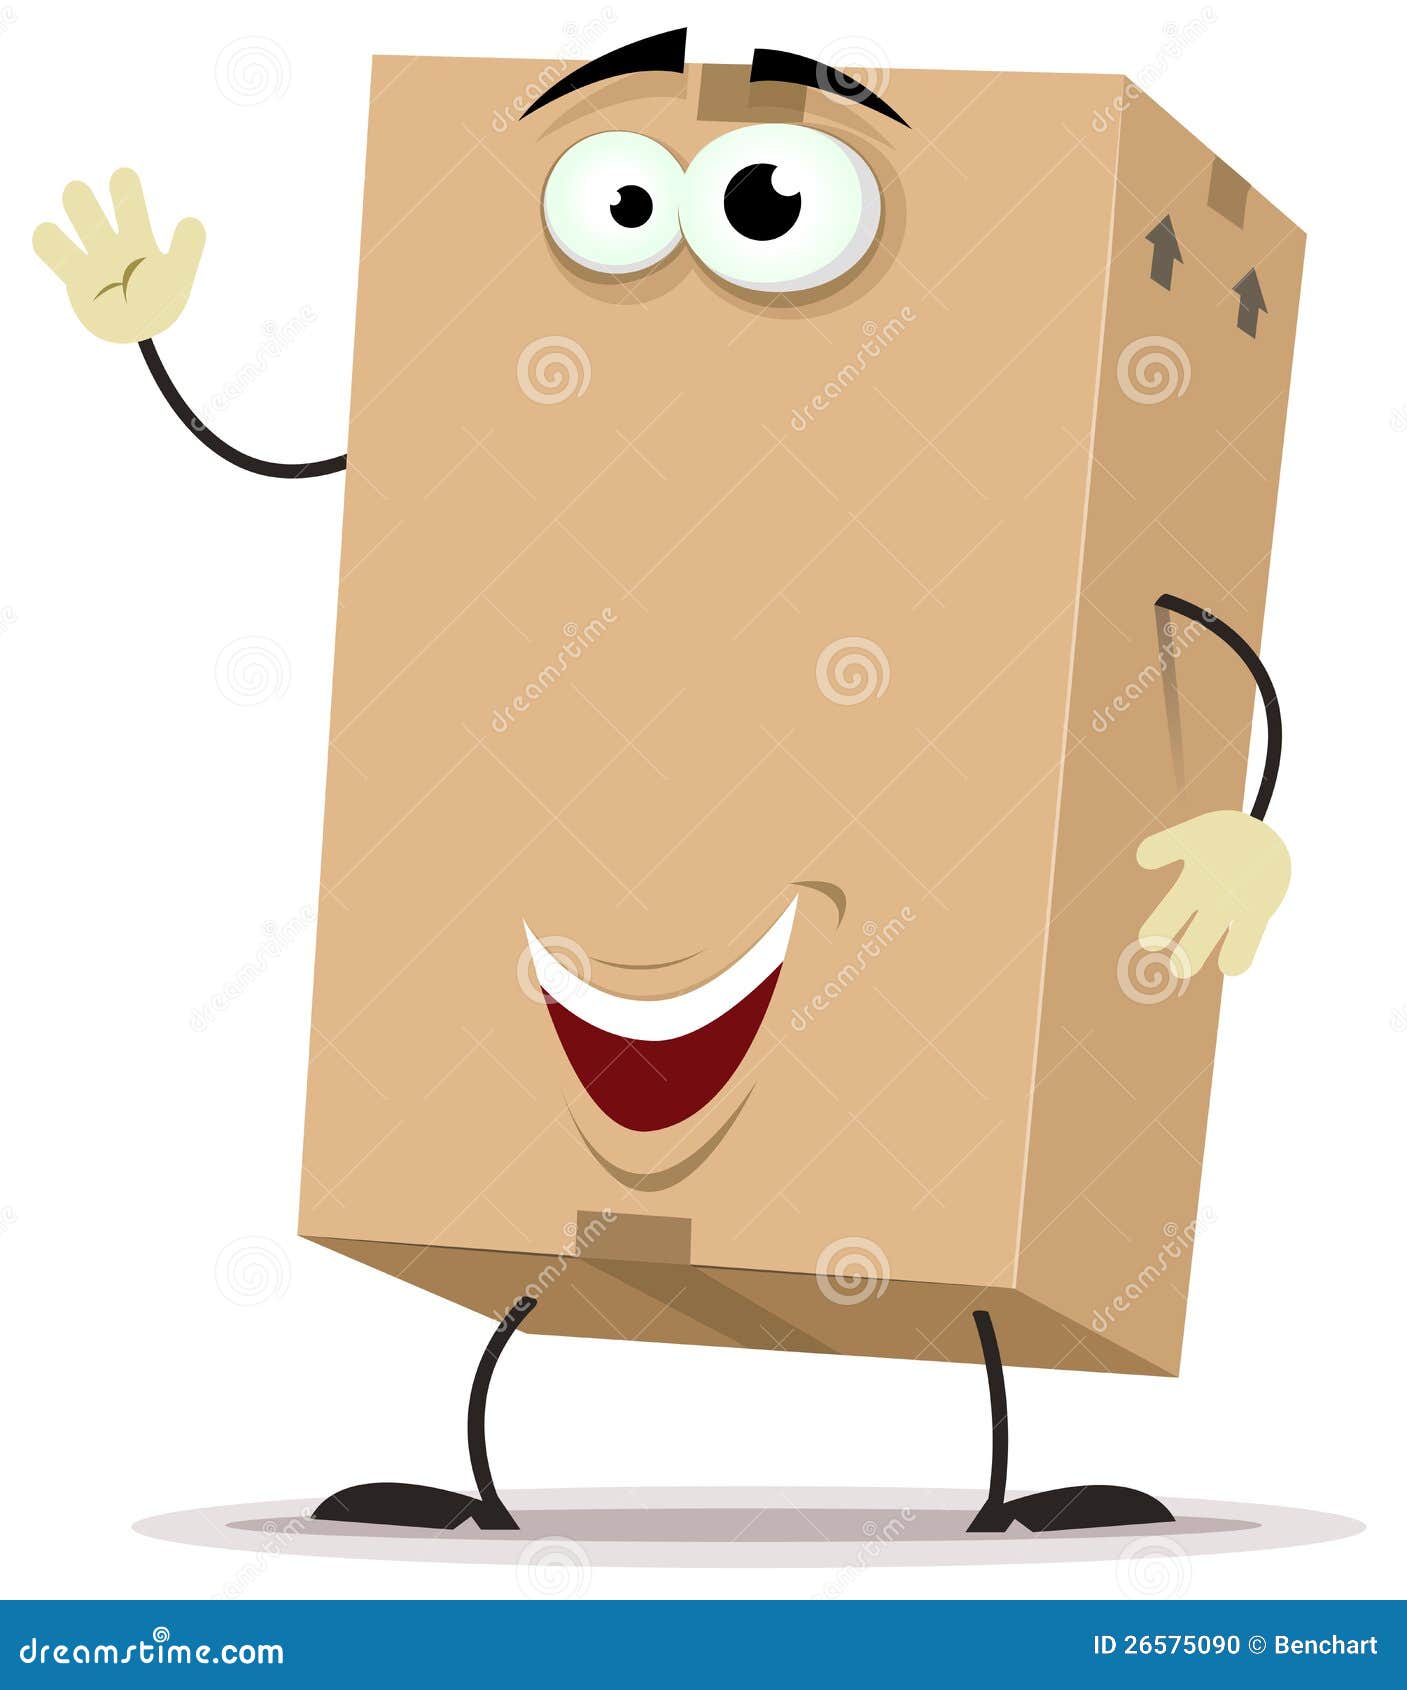 Cartoon Cardboard Delivery Character Stock Vector - Illustration of market,  retail: 26575090